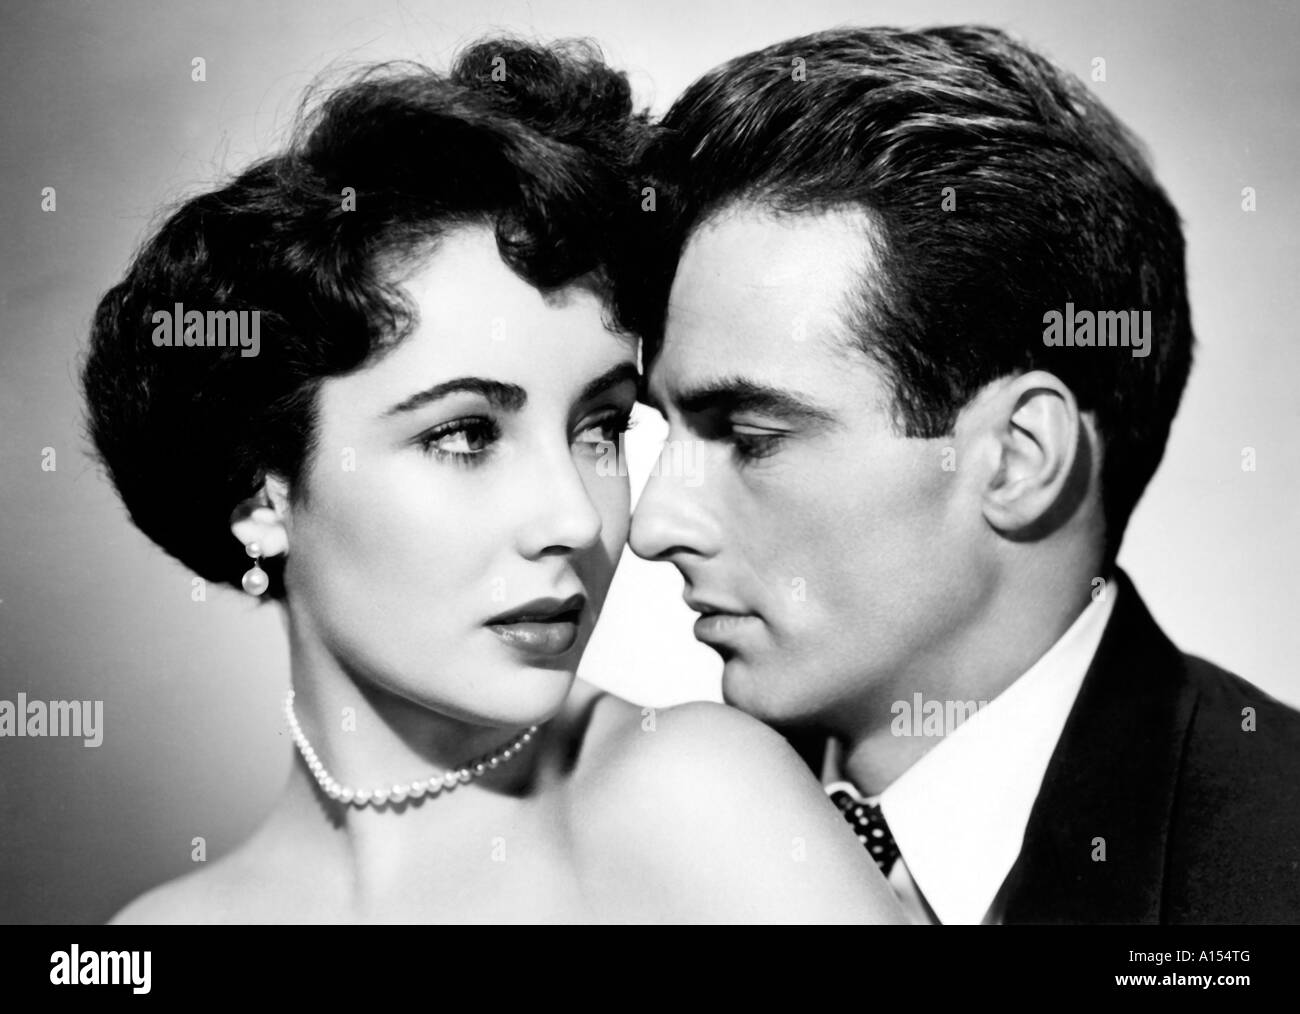 A Place In The Sun Year 1951 Director George Stevens Montgomery Clift Elizabeth Taylor Based upon Theodore Dreiser s book Stock Photo